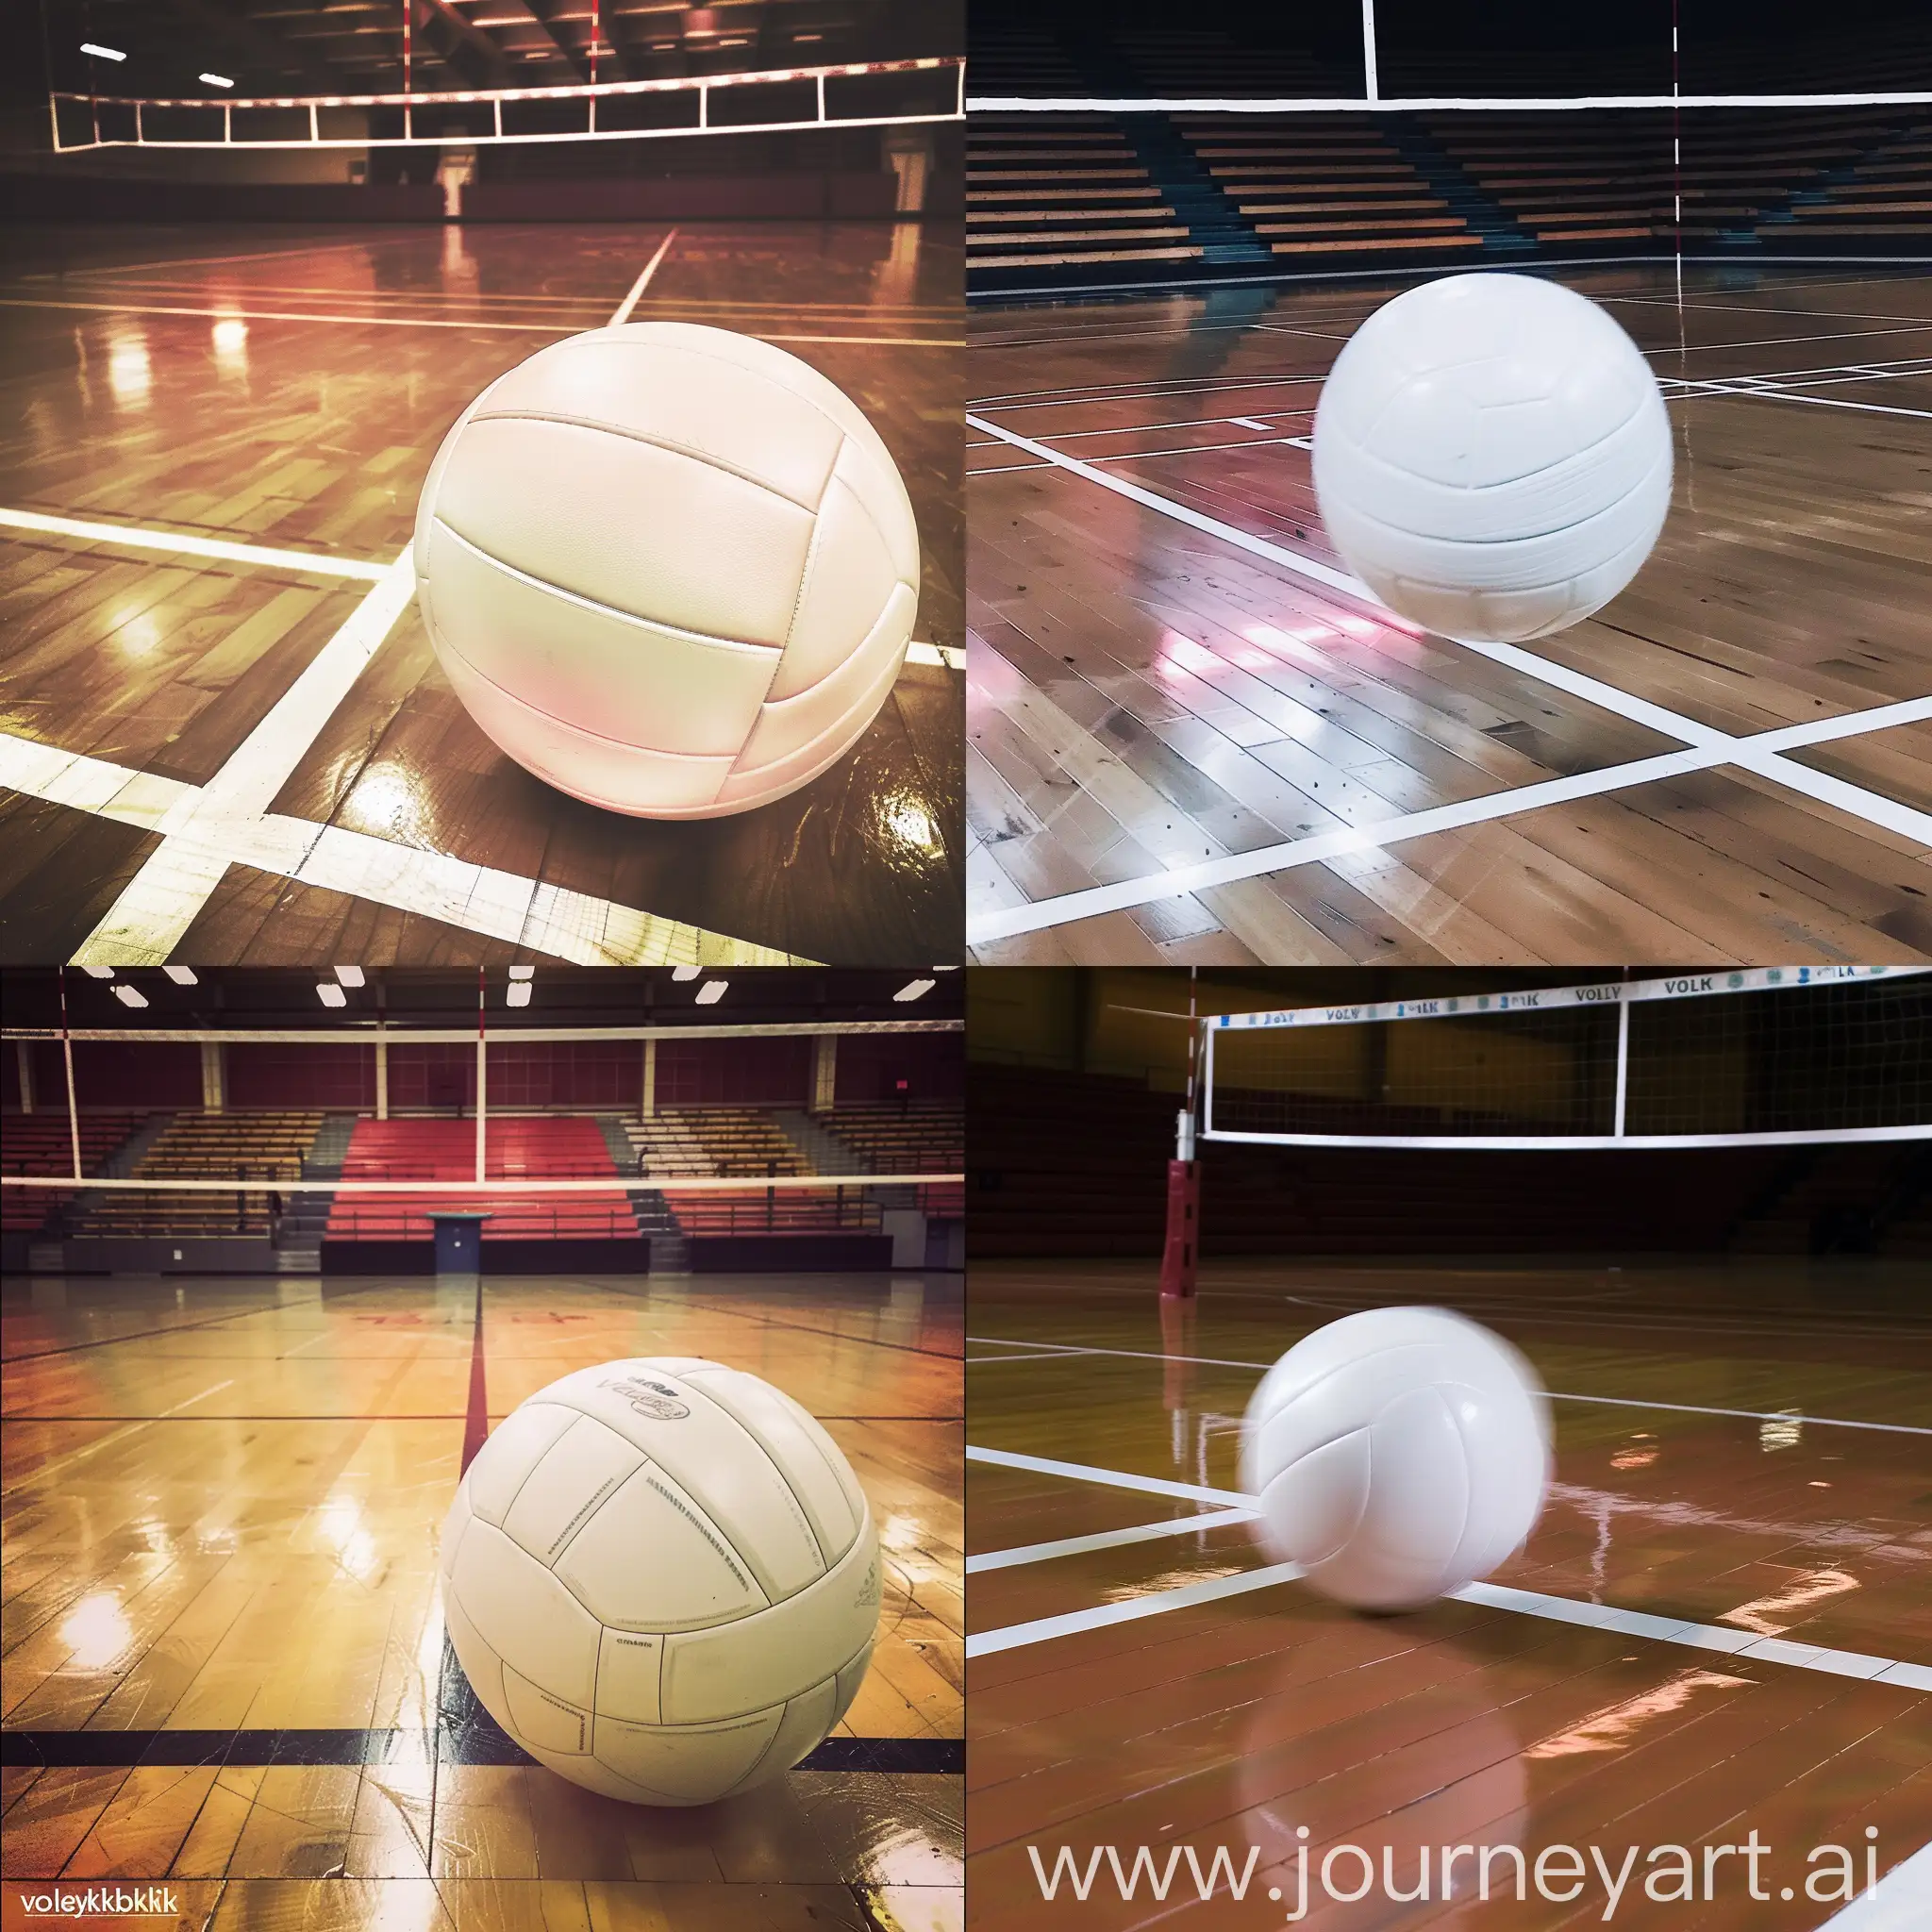 Dynamic-Volleyball-Court-with-Energetic-Ball-Motion